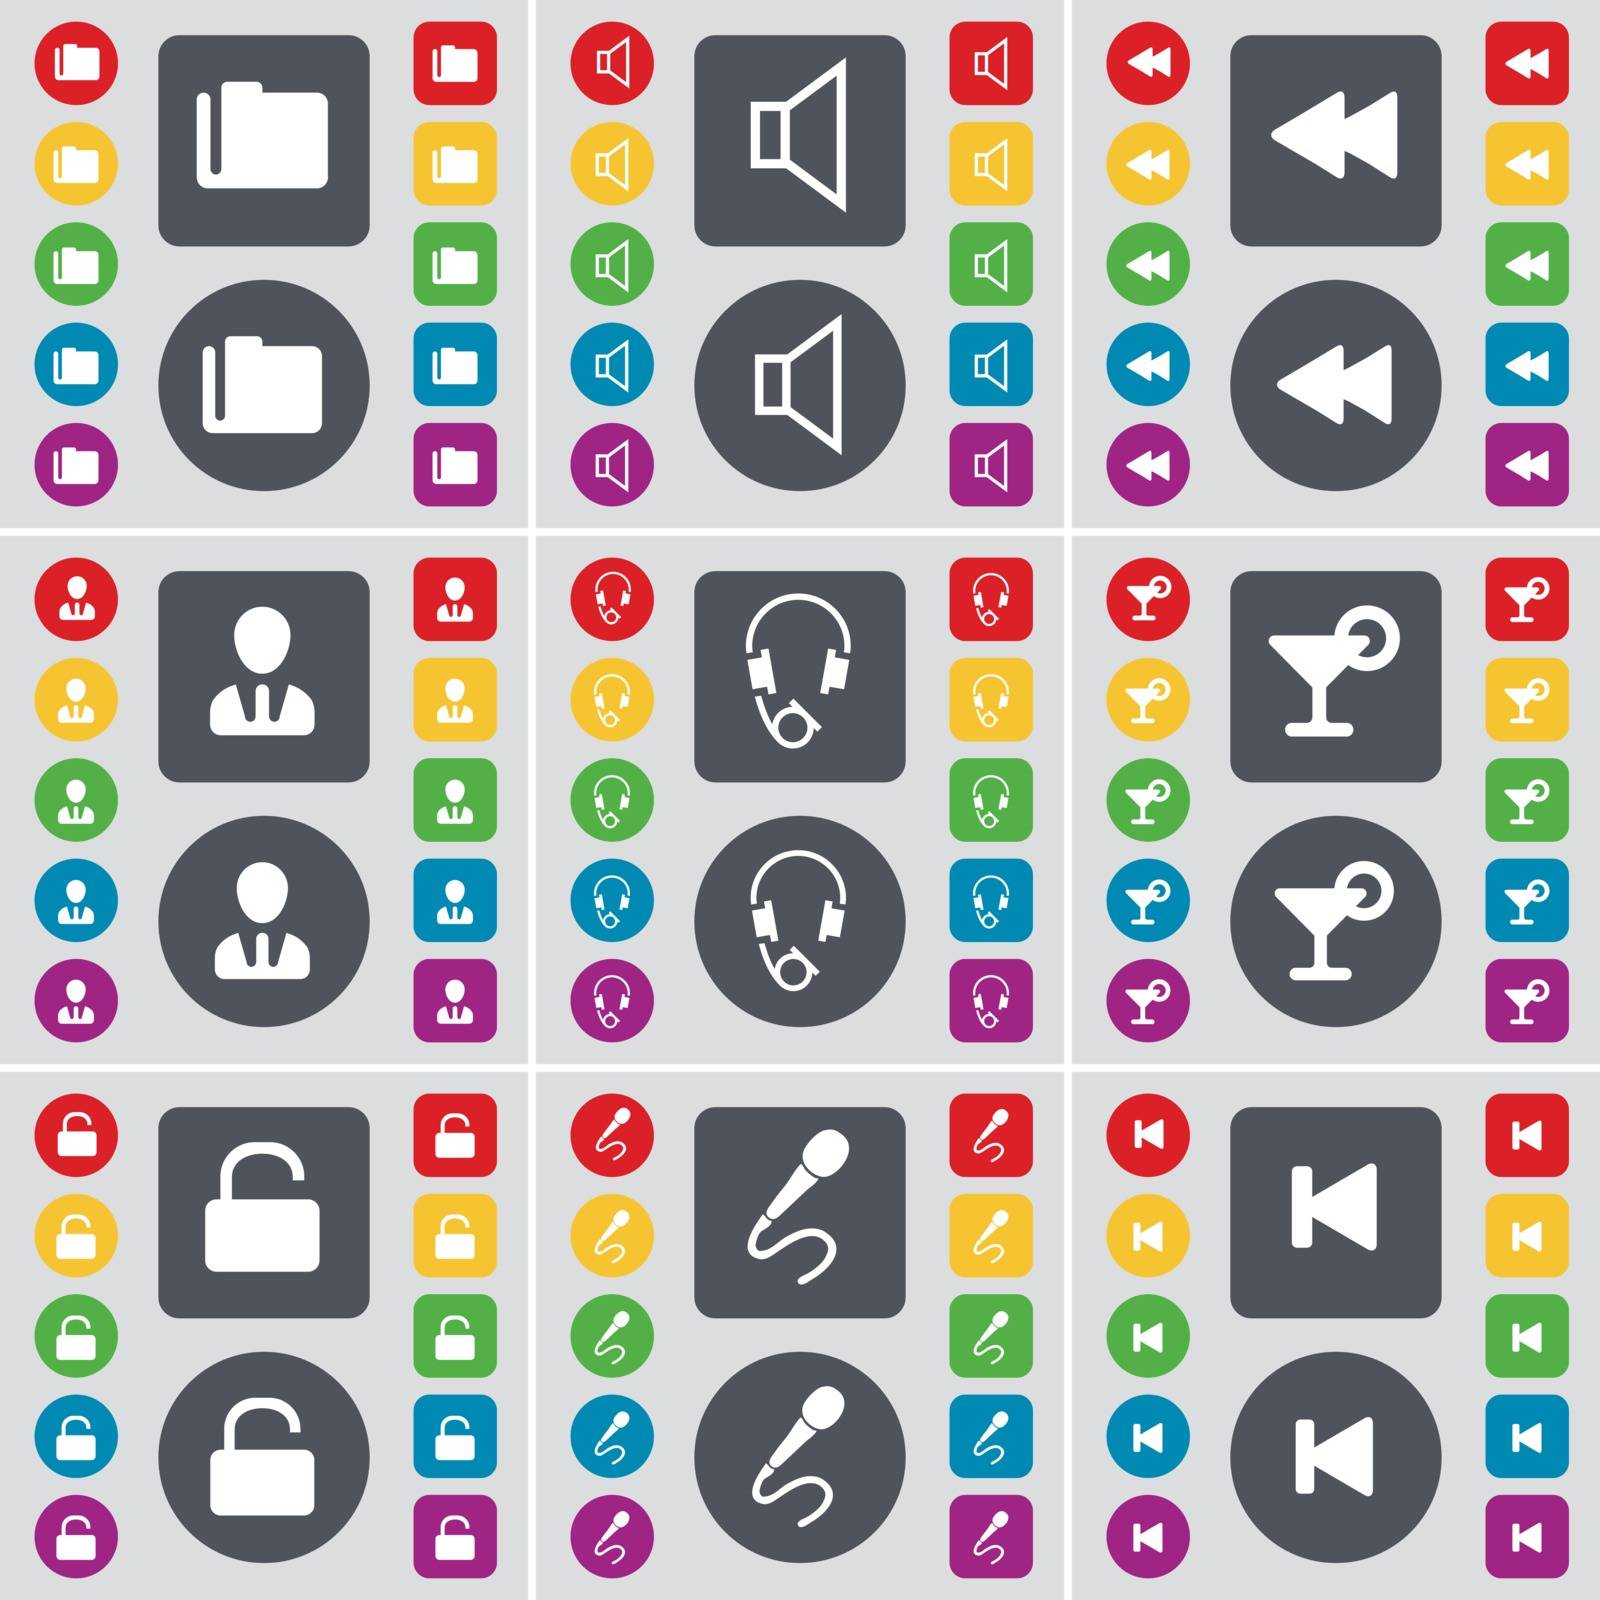 Folder, Sound, Rewind, Avatar, Headphones, Cocktail, Lock, Microphone, Media skip icon symbol. A large set of flat, colored buttons for your design. Vector illustration